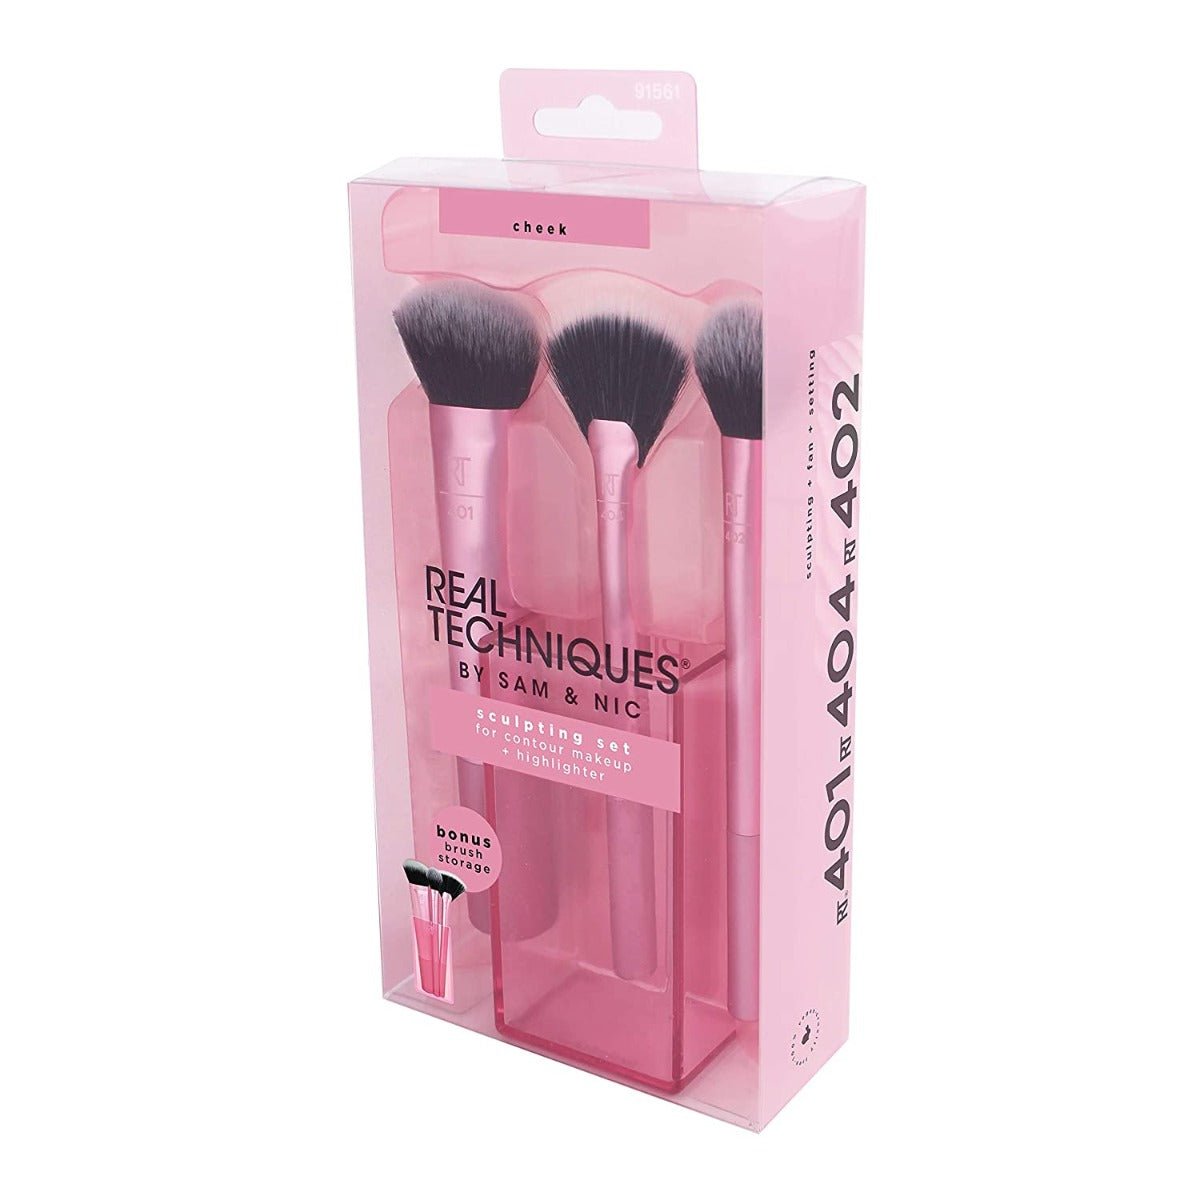 Real Techniques Sculpting Brush Set Pink 3Pieces - AllurebeautypkReal Techniques Sculpting Brush Set Pink 3Pieces